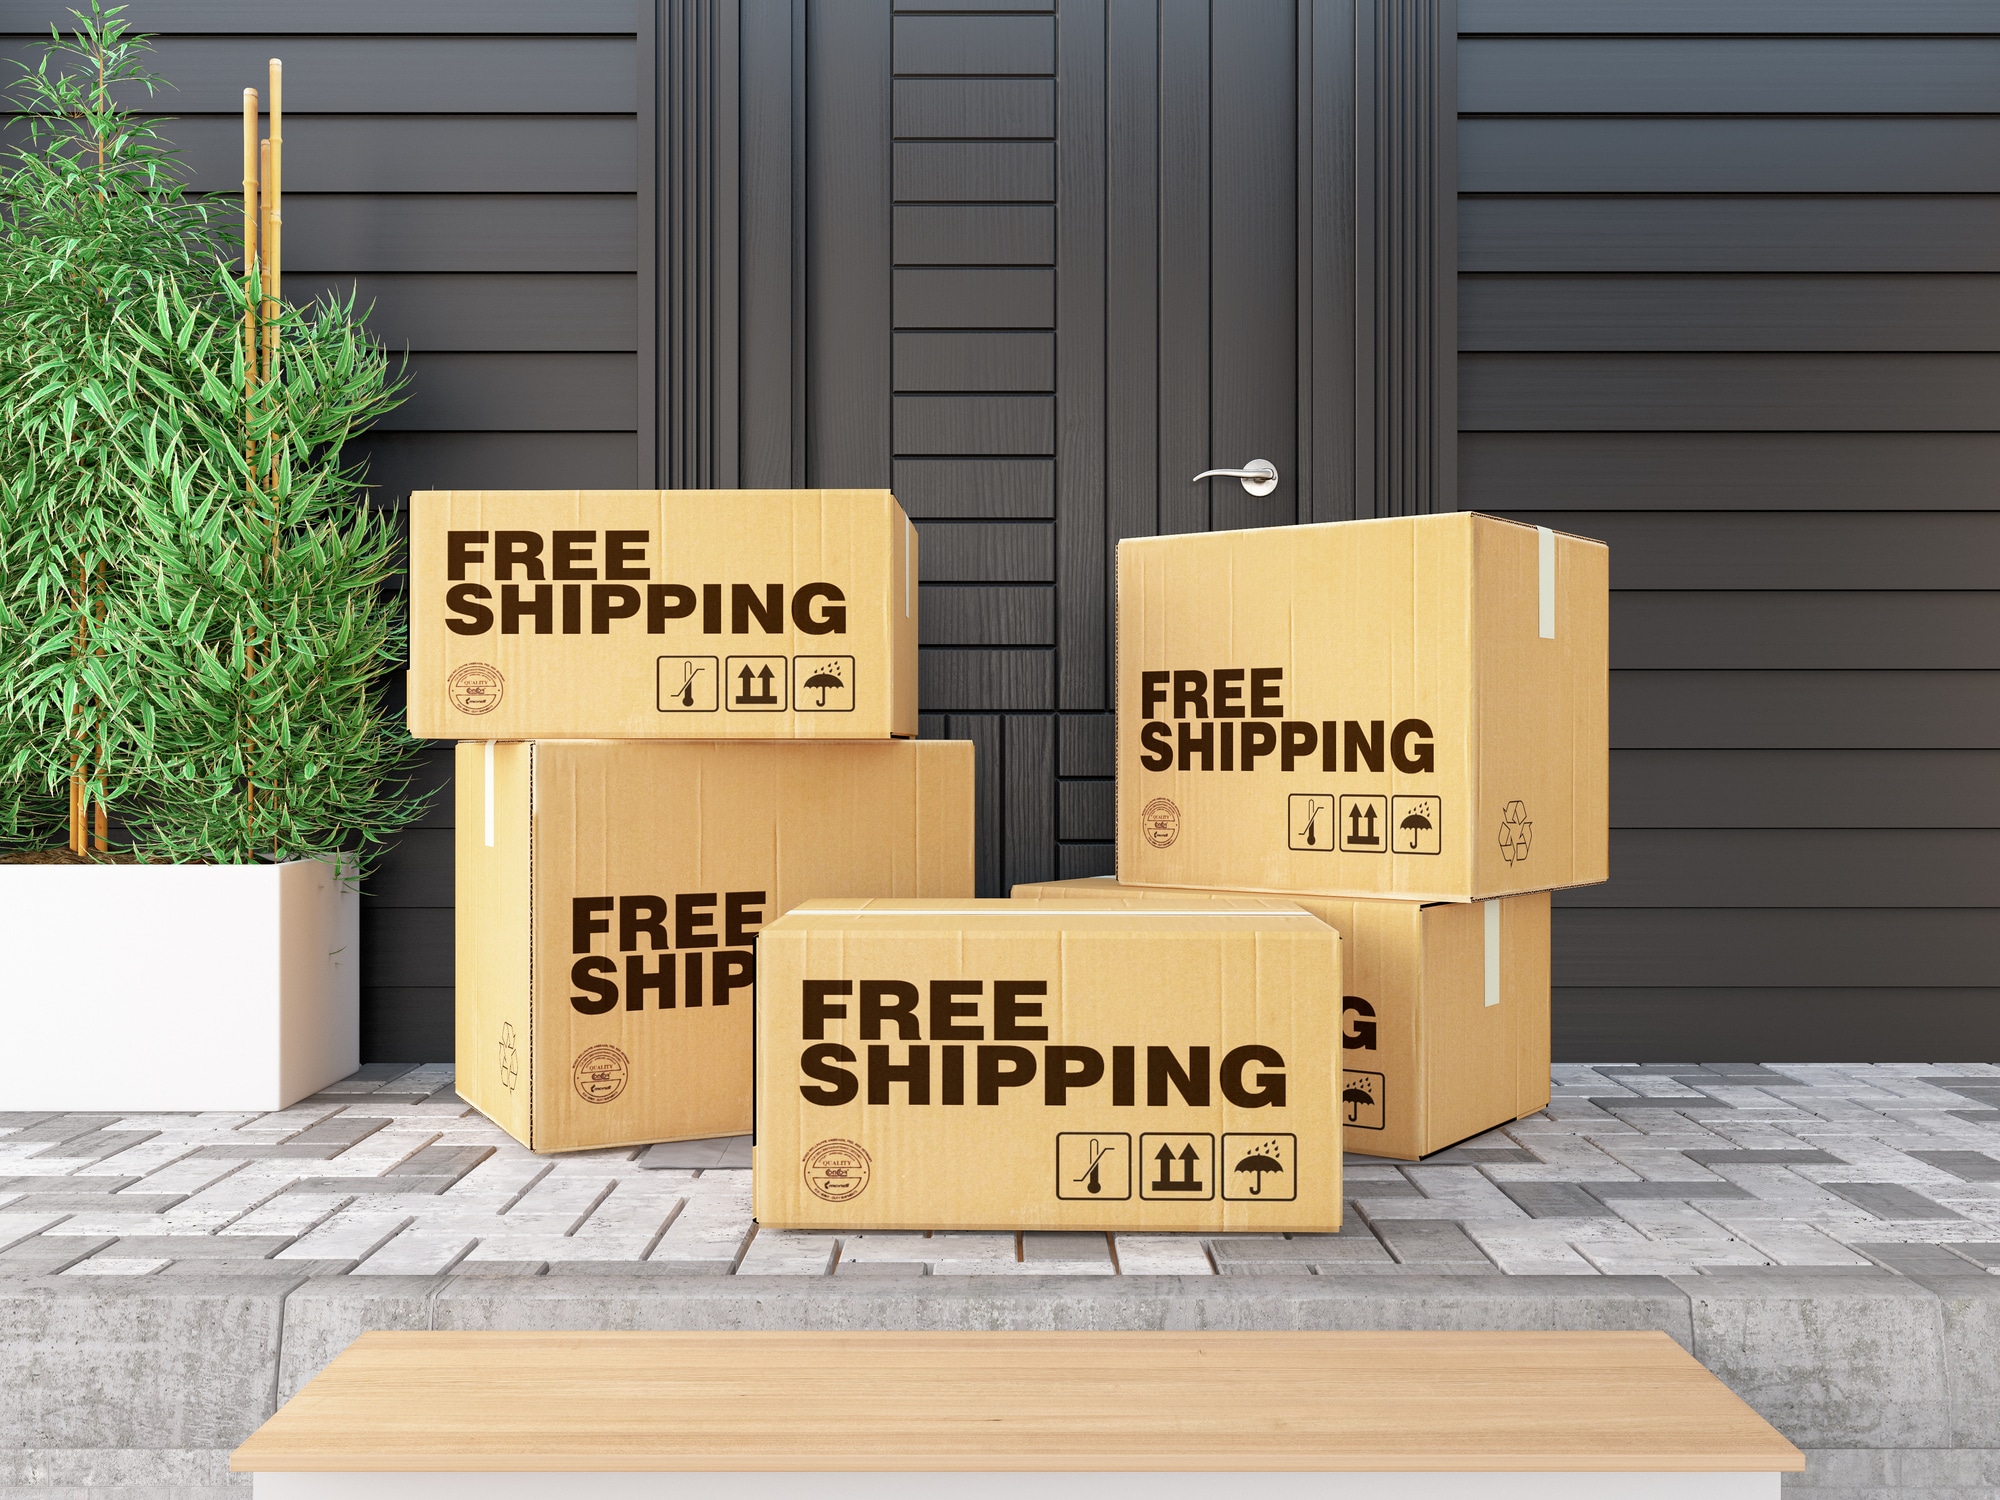 Free Shipping Cargo Boxes on Doorway